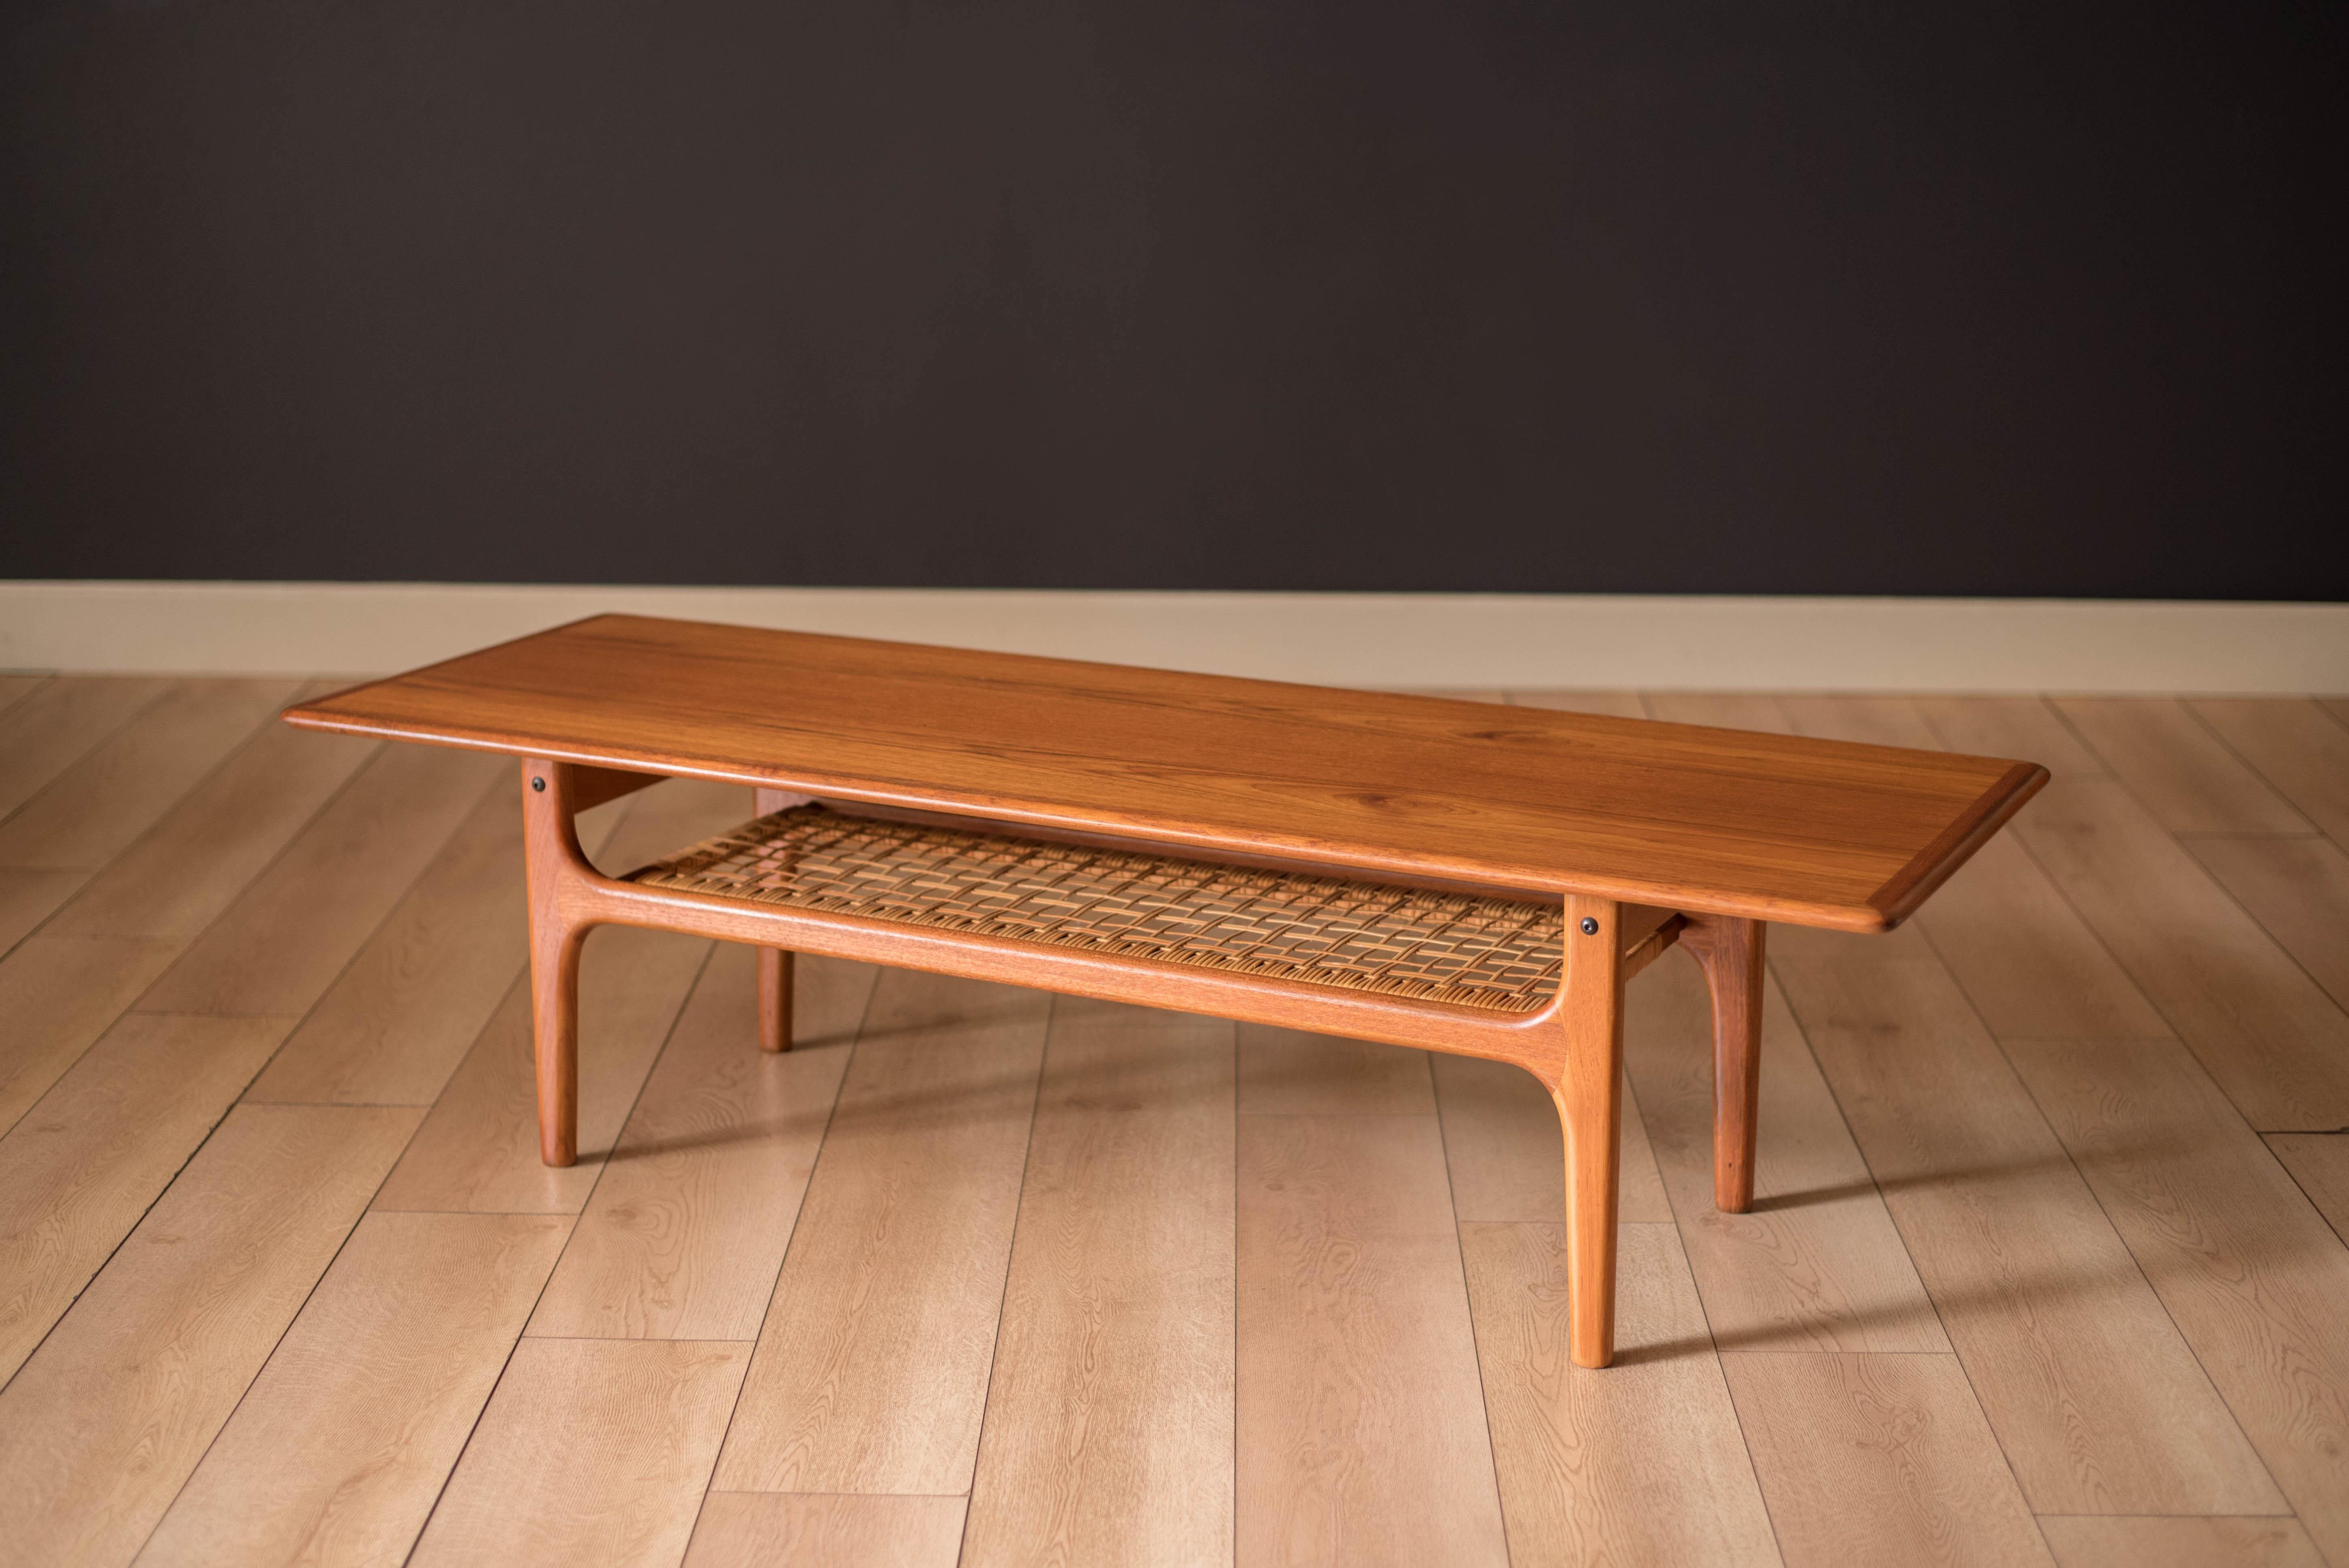 Mid century modern coffee table manufactured by Trioh, Denmark. This piece features sculpted edge banding and natural teak wood grains. Includes a lower tier magazine shelf for extra storage display made of hand woven cane kept intact.